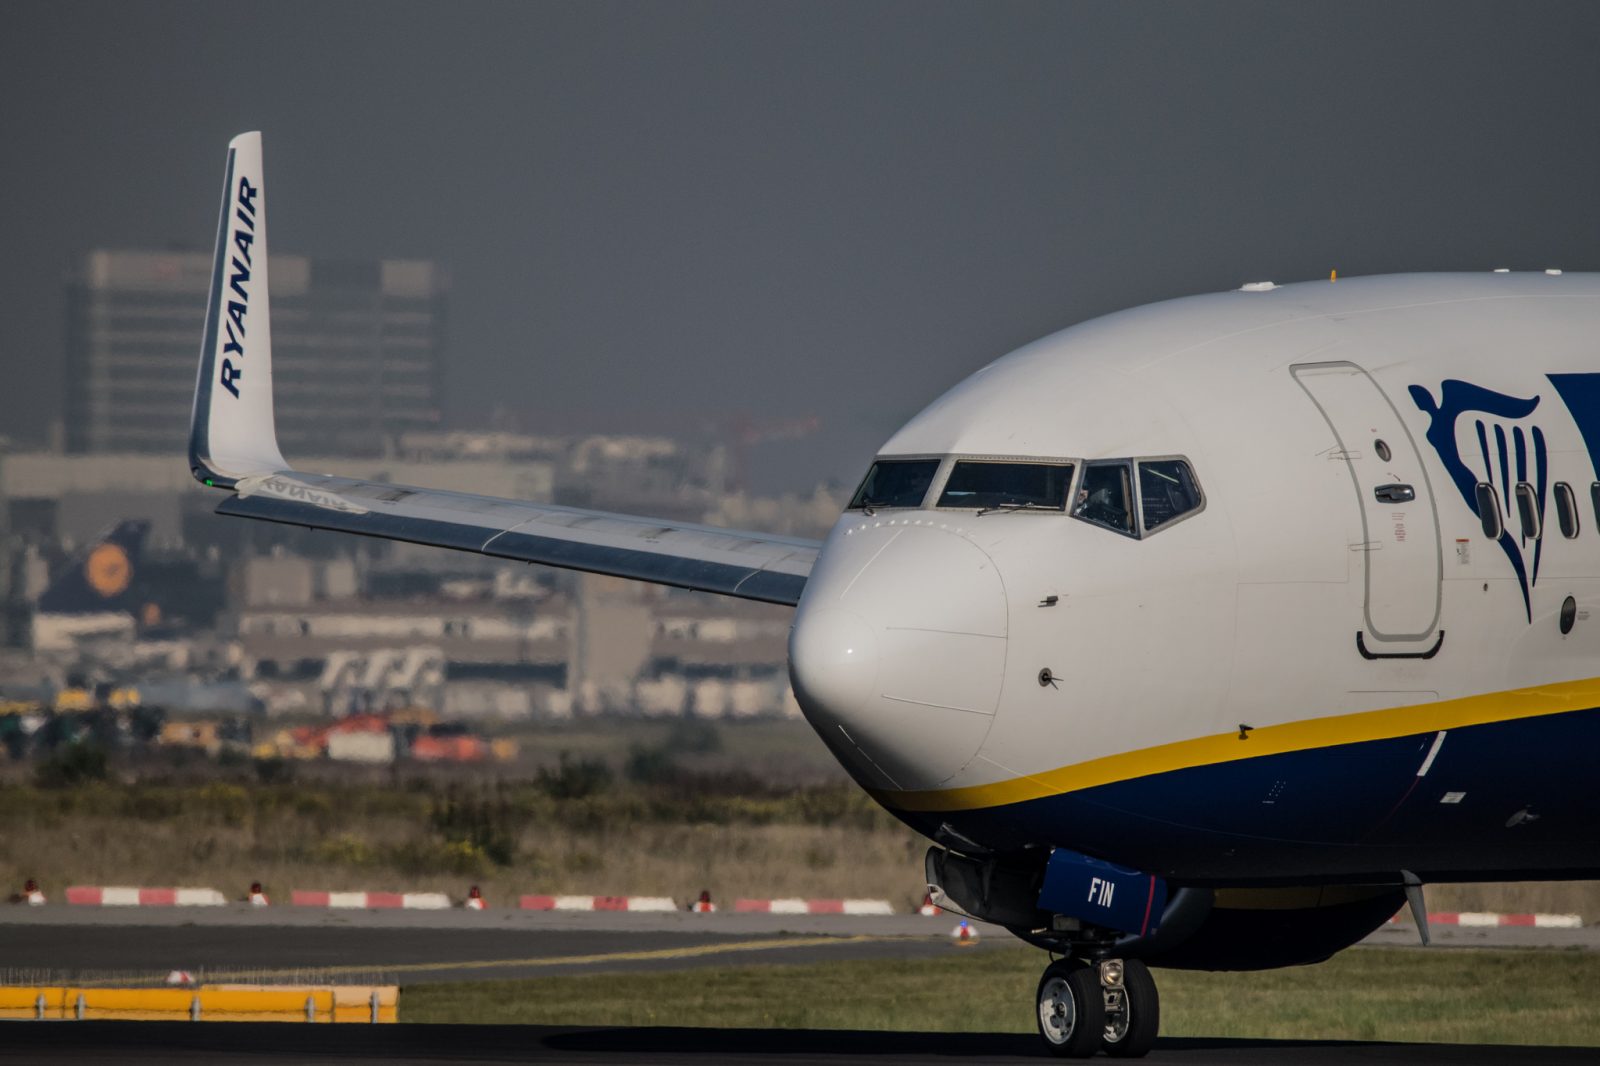 European Cabin Crew Association Now Says Ryanair's Move to Recognise Unions is a "Publicity Stunt"